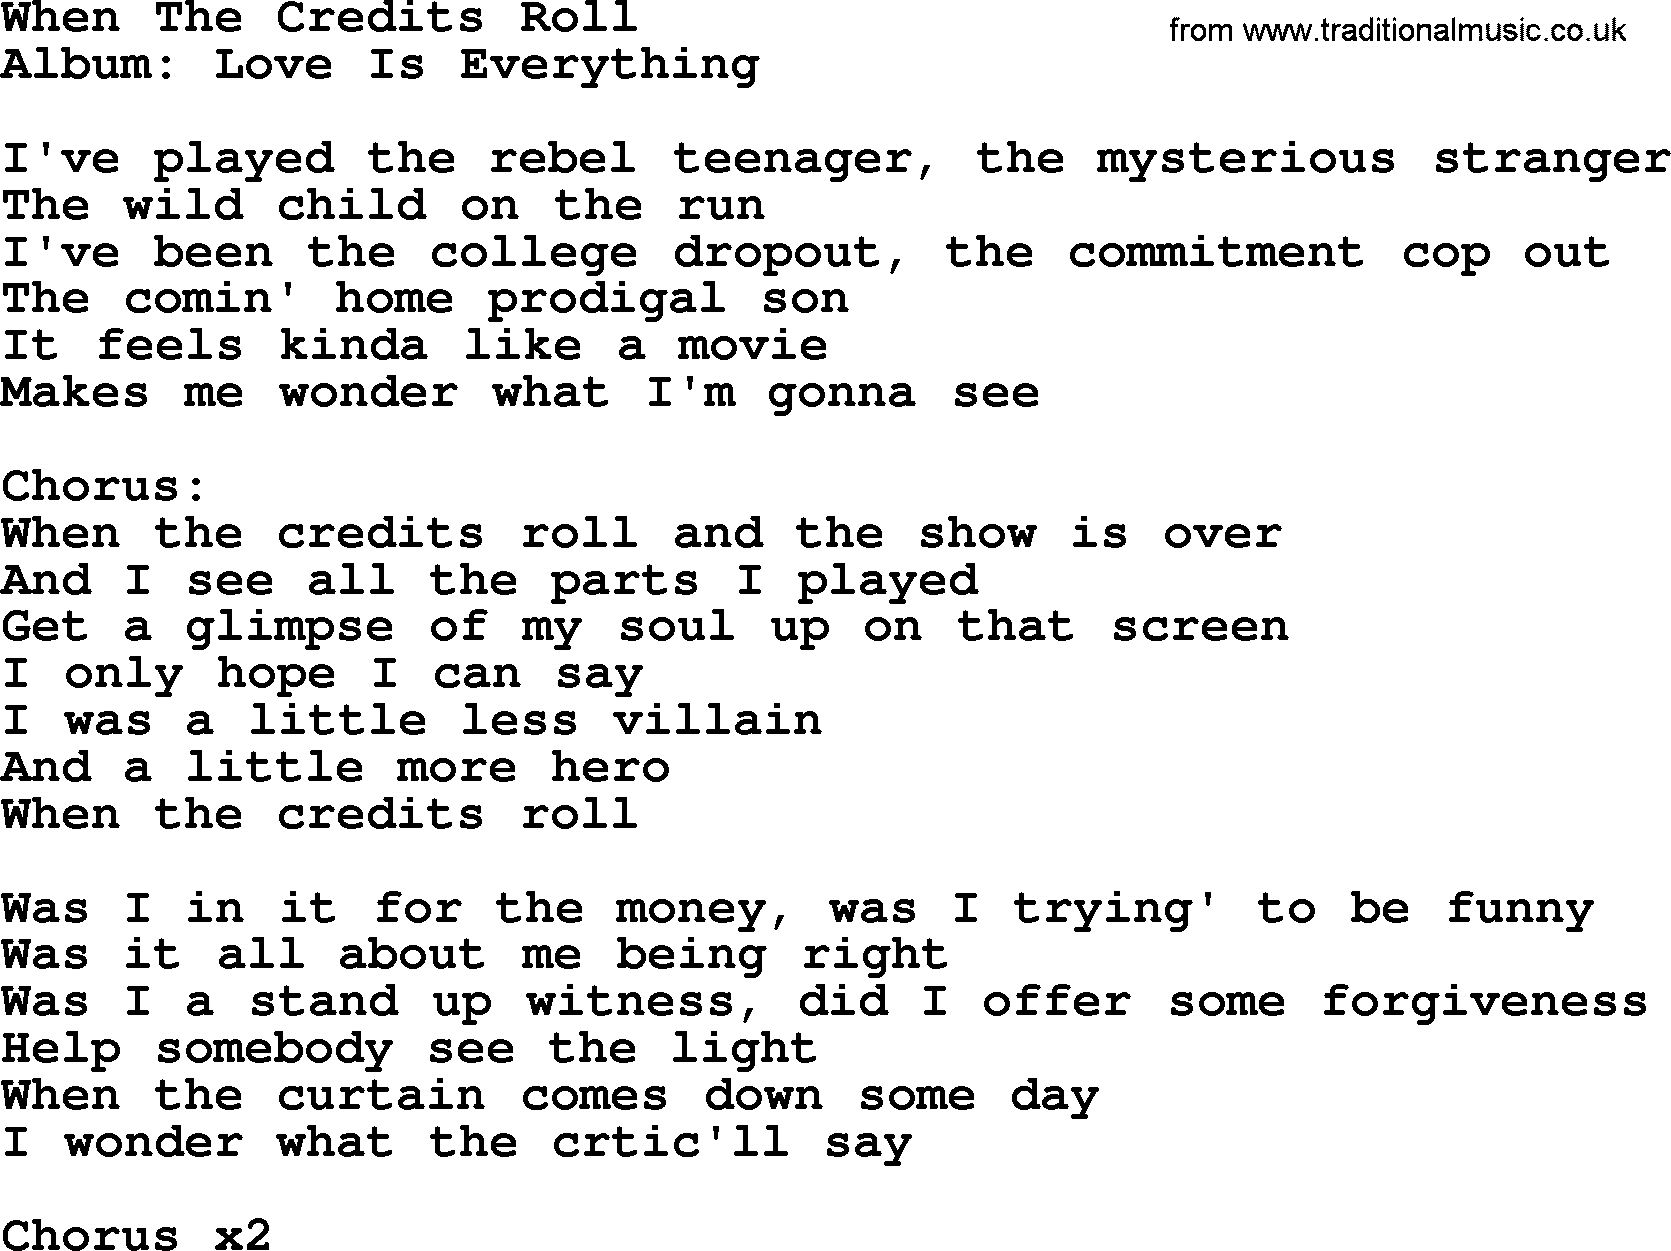 George Strait song: When The Credits Roll, lyrics